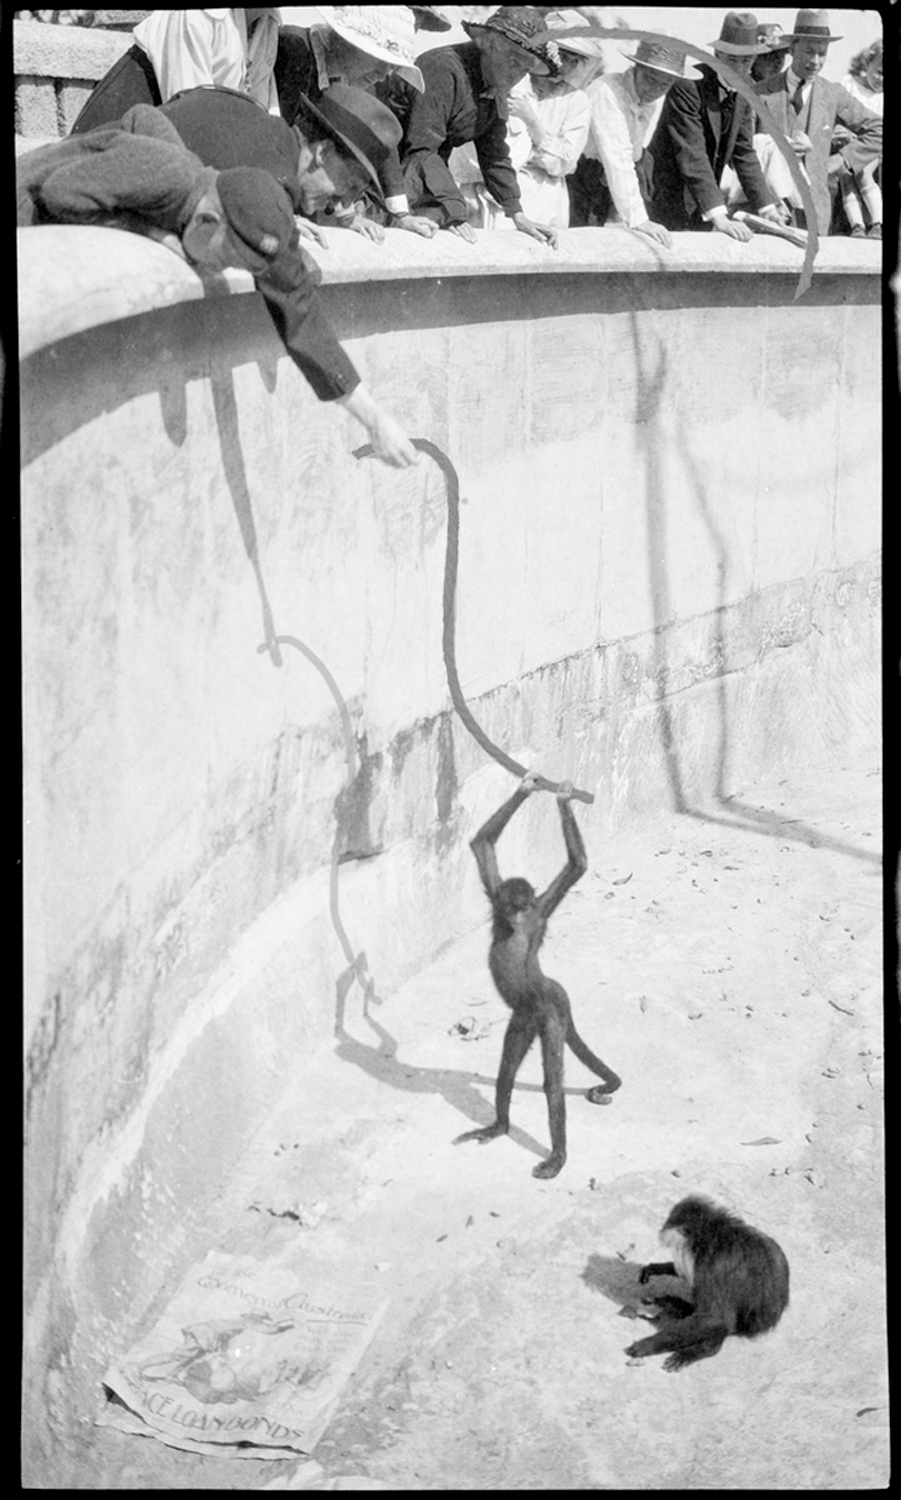 Archival image of a spider monkey digitally altered to include a rope dangled from above